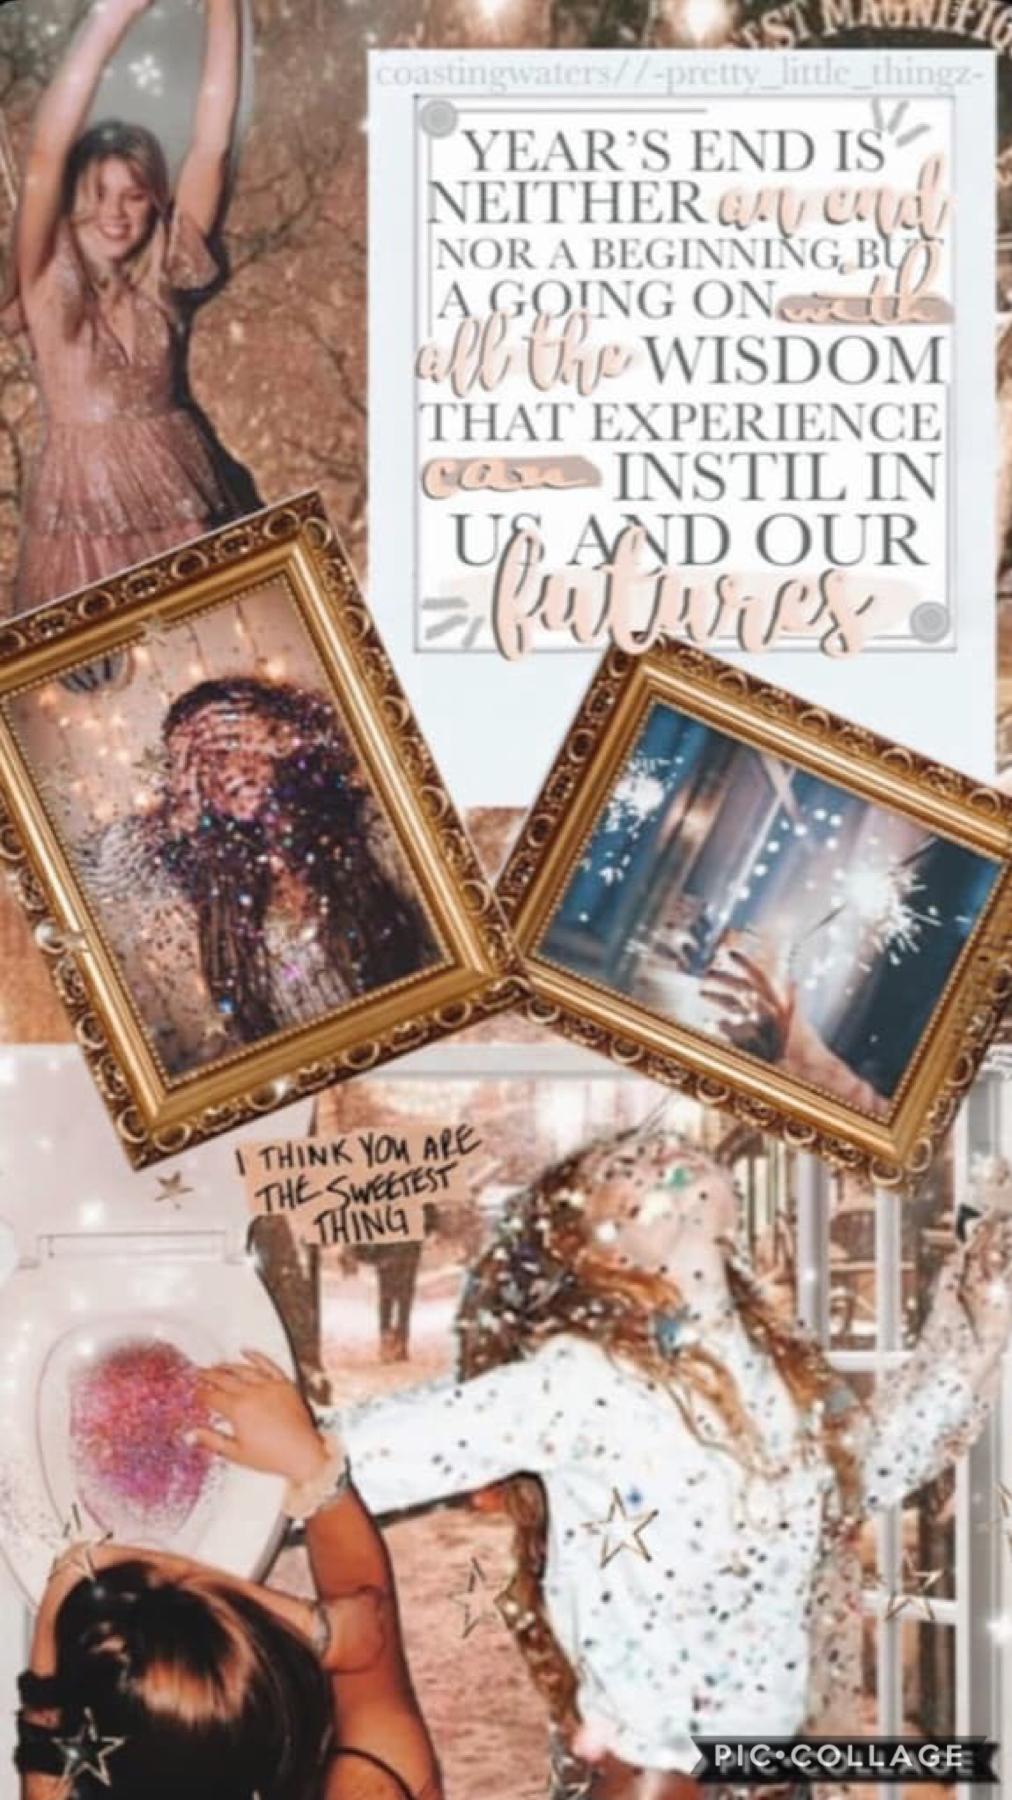 🥳3/1/21🥳
How’s everyone’s year been so far? Here’s a collab with -pretty_little_thingz-! Go follow them! They did the bg and I did the text! QOTD: Snow outside yet? AOTD: Yup!